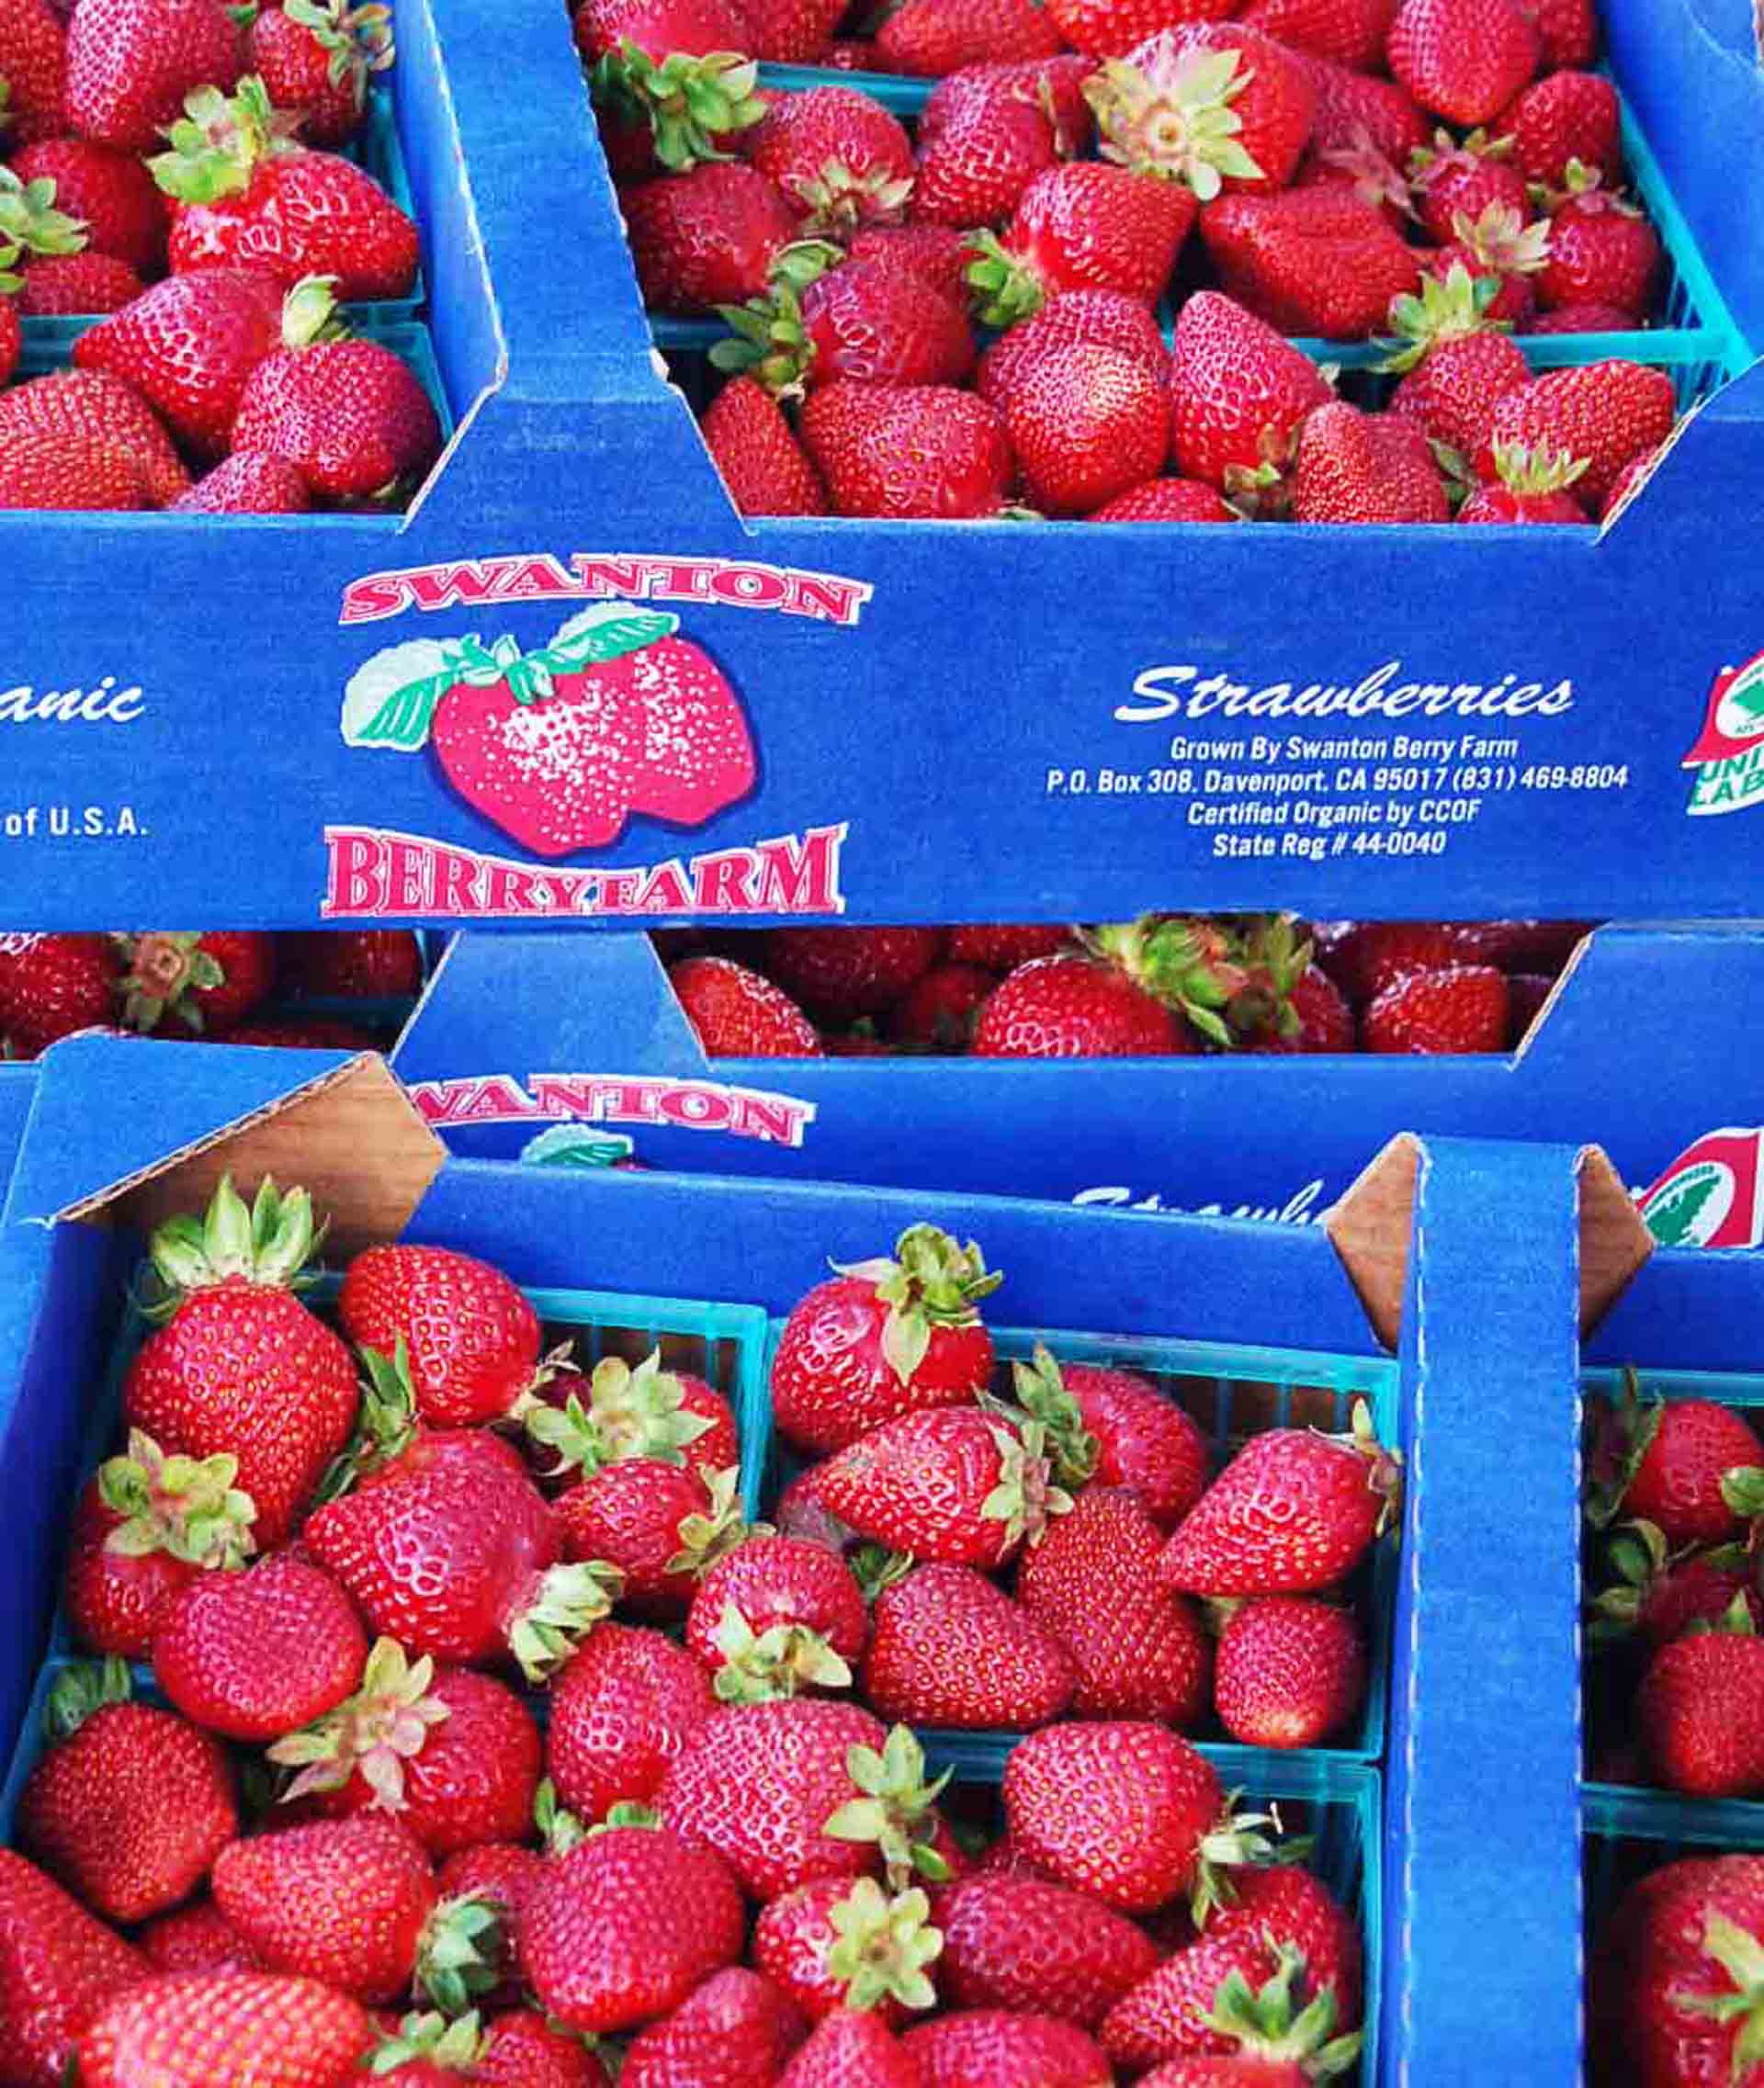 The Chandler berries from Swanton are found at Bay Area farmers markets as well as markets such as Bi-Rite, Monterey Market and Rainbow Grocery, depending on availability.